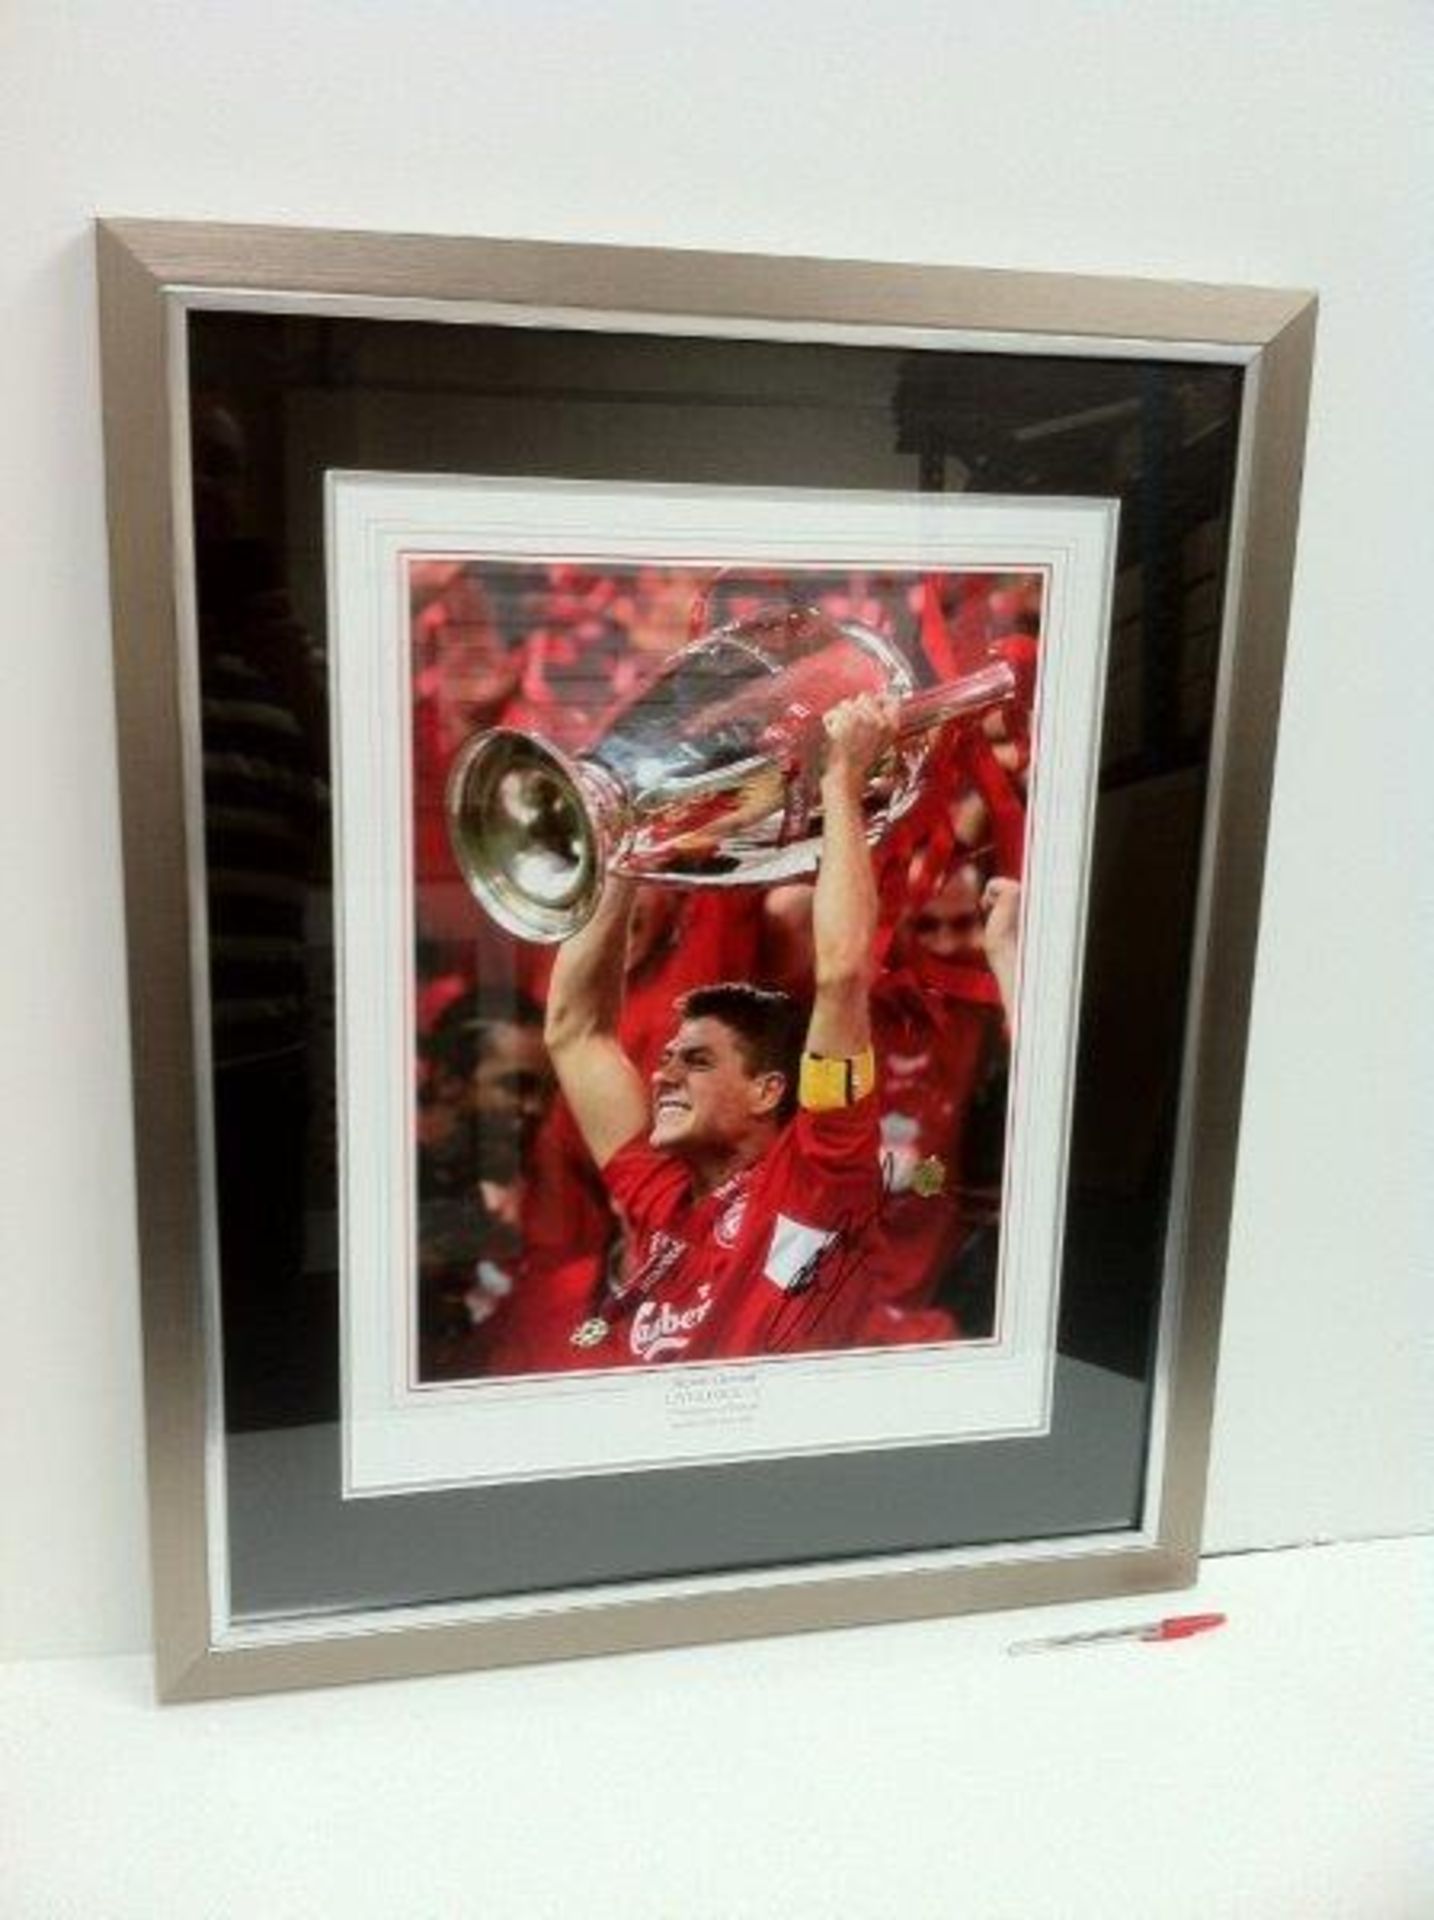 Steven Gerrard signed photo. Frame size (inches): 32x26